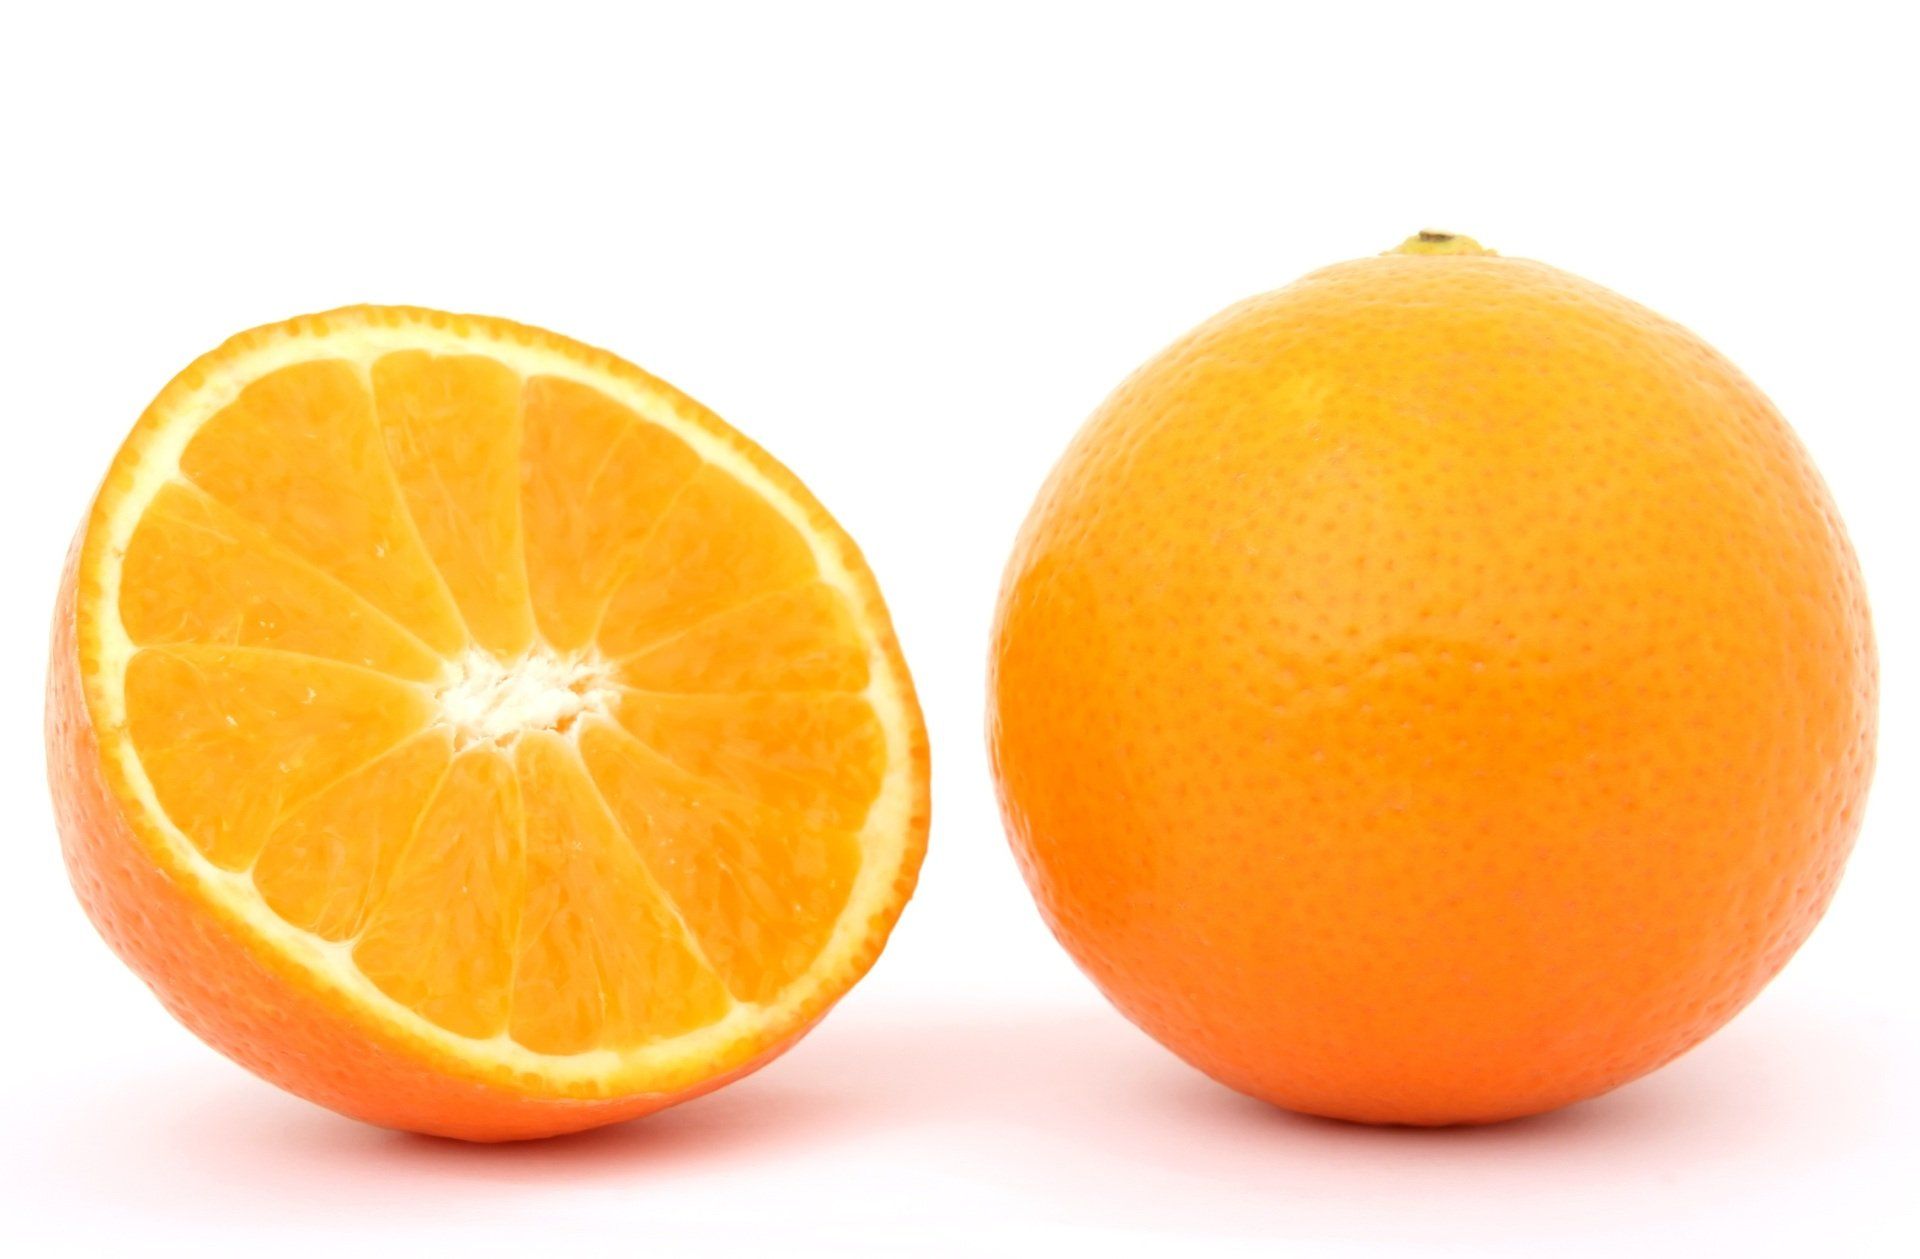 Two oranges are cut in half on a white background